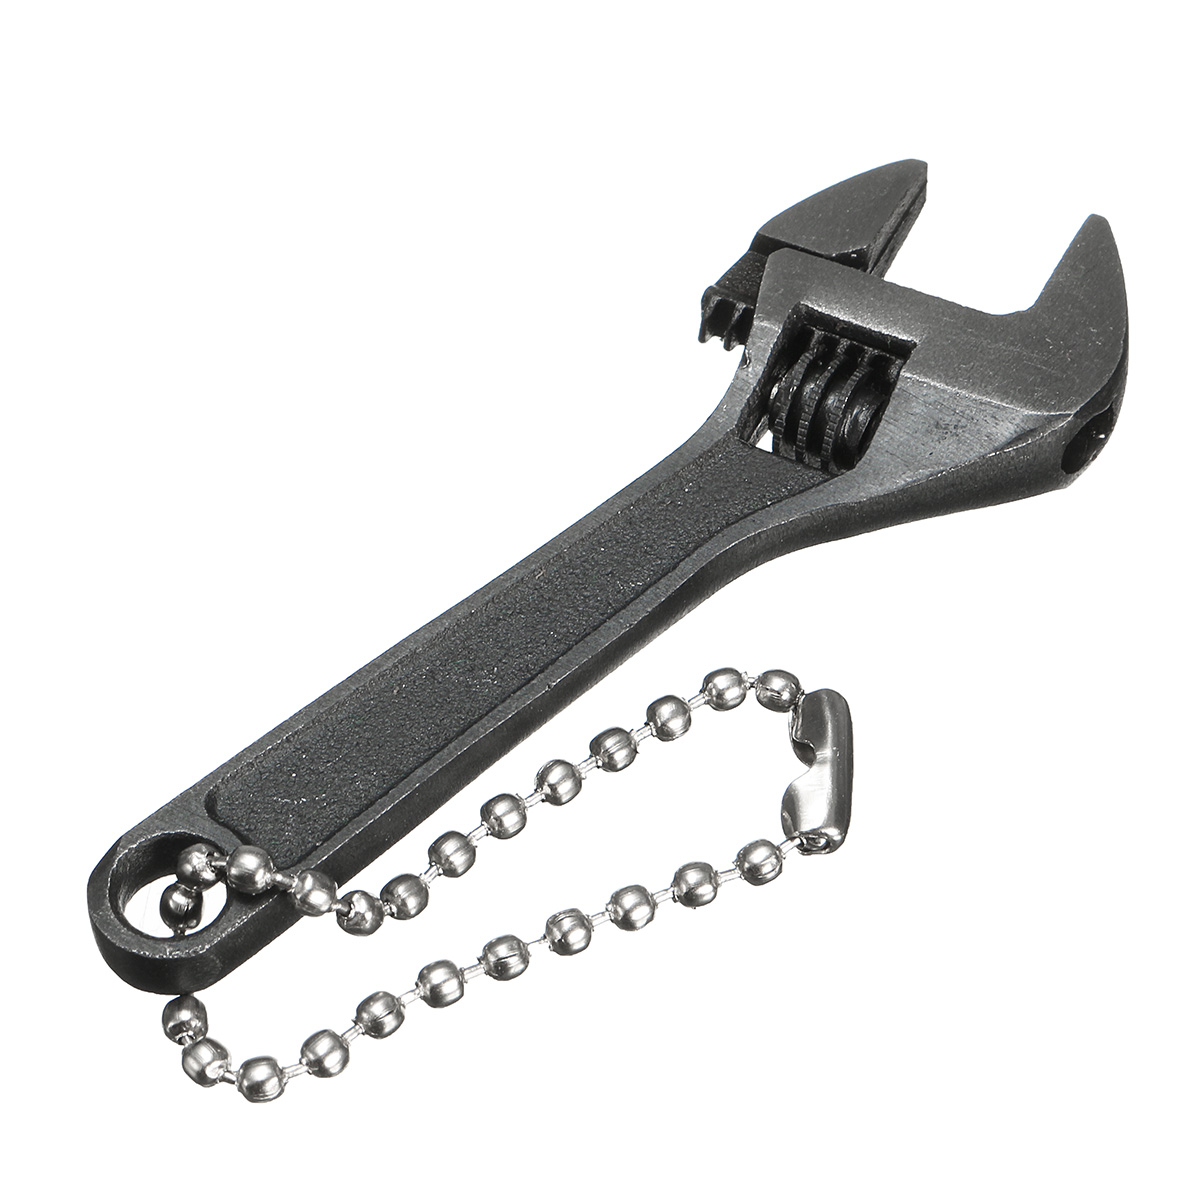 DANIU-66mm-26inch-Mini-Metal-Adjustable-Wrench-Spanner-Hand-Tool-0-10mm-Jaw-Wrench-Black-1199883-9